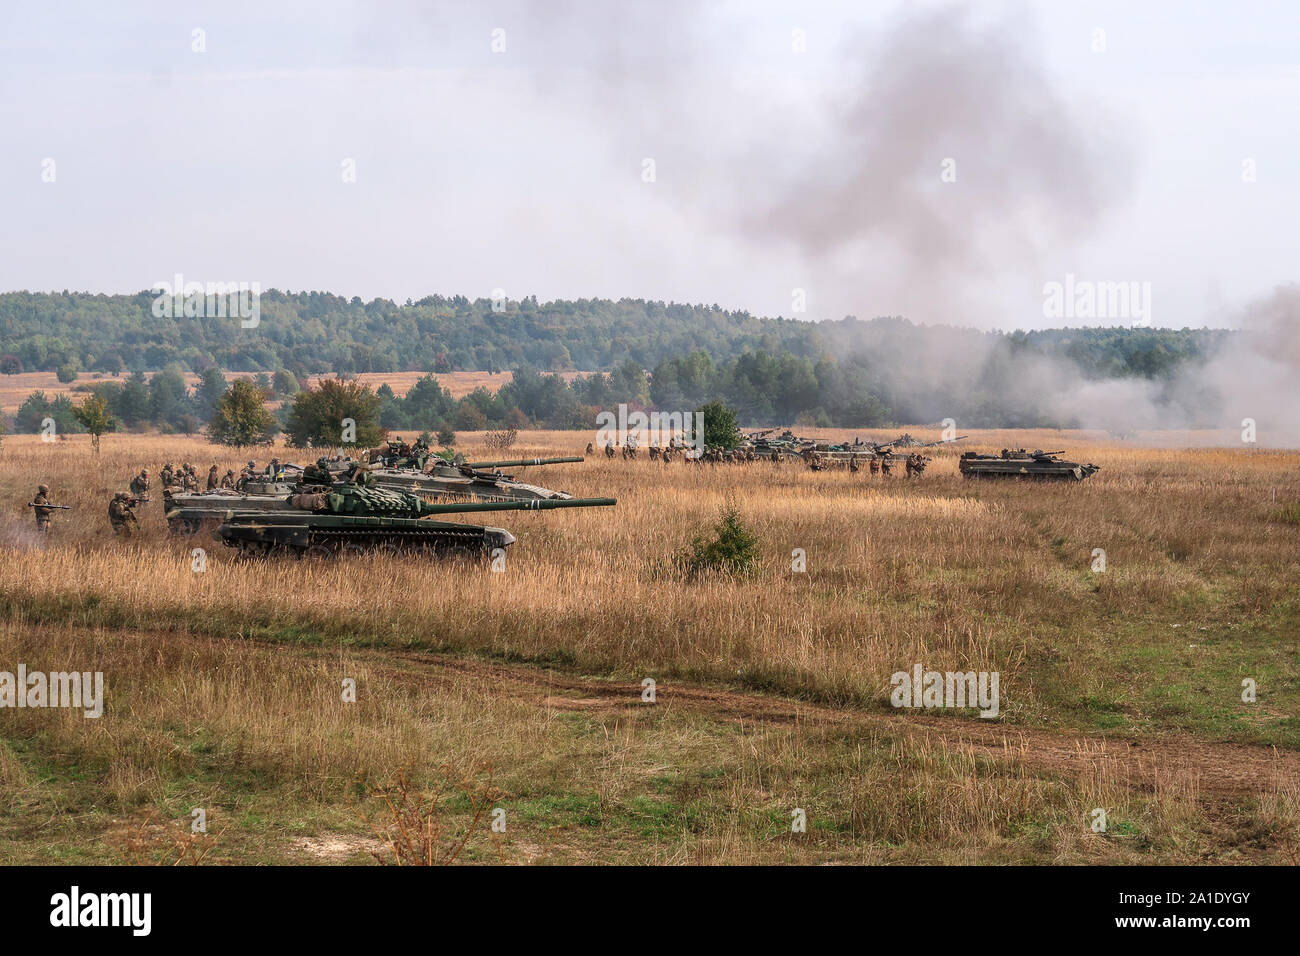 The 10th Mountain Assault Brigade conducts combined arms operations during their brigade field training exercise (FTX) at Combat Training Center-Yavoriv, Sept. 25, 2019. Stock Photo